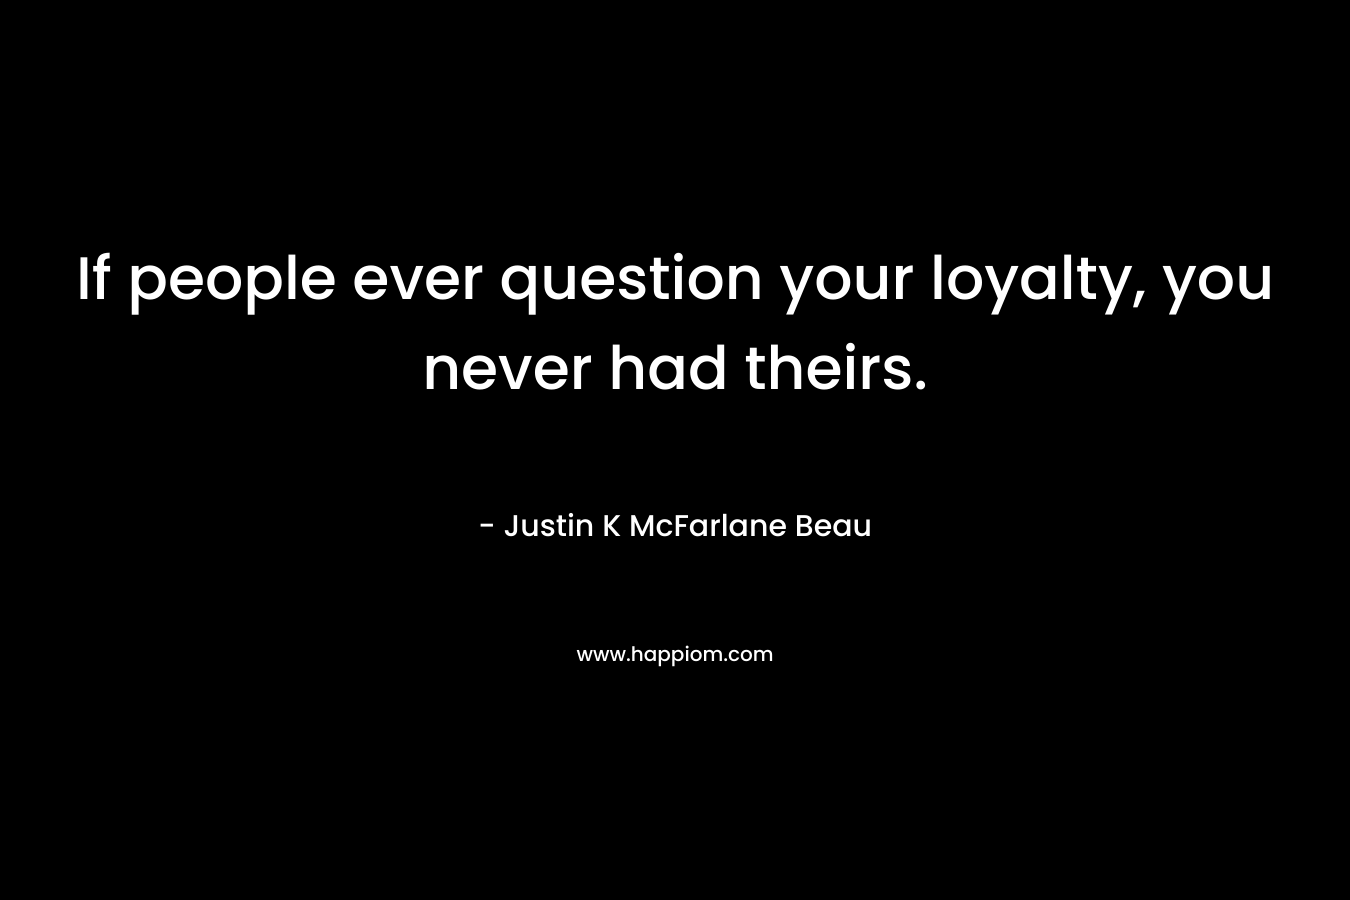 If people ever question your loyalty, you never had theirs.